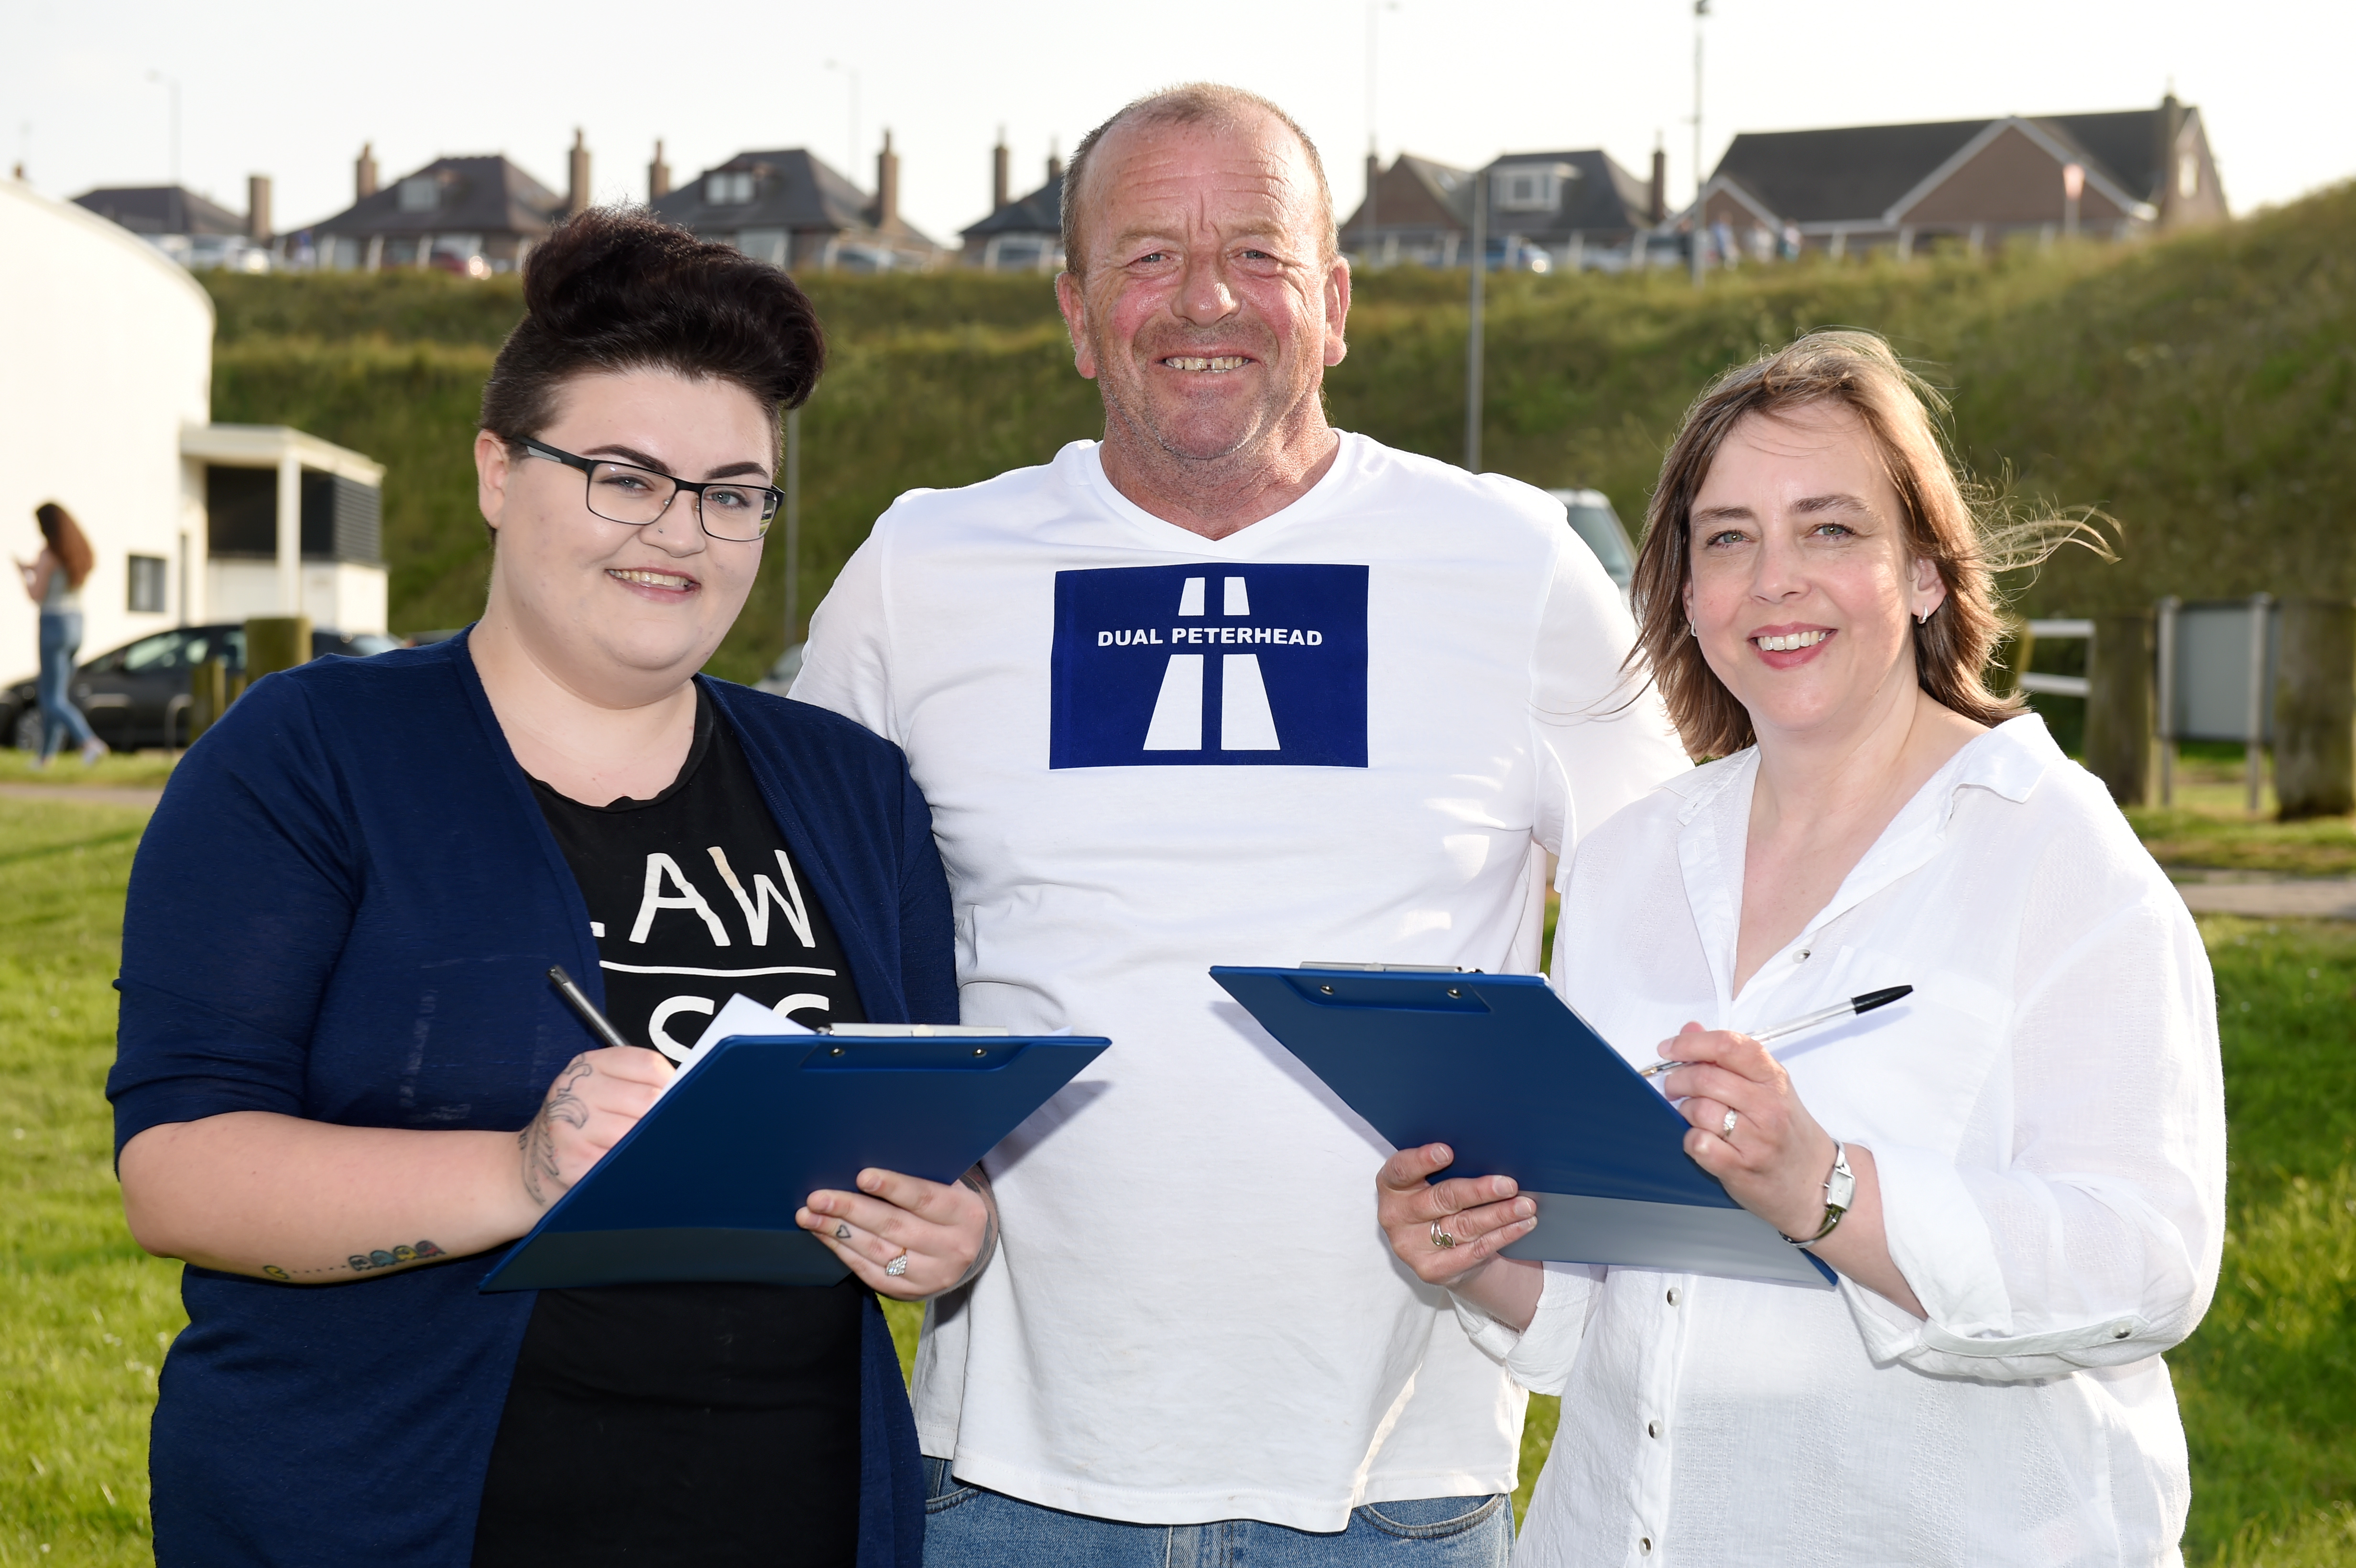 Dual Peterhead group asking for signatures.
Picture of (L-R) Sianan Watson, Bruce Buchan and Lisa Buchan.